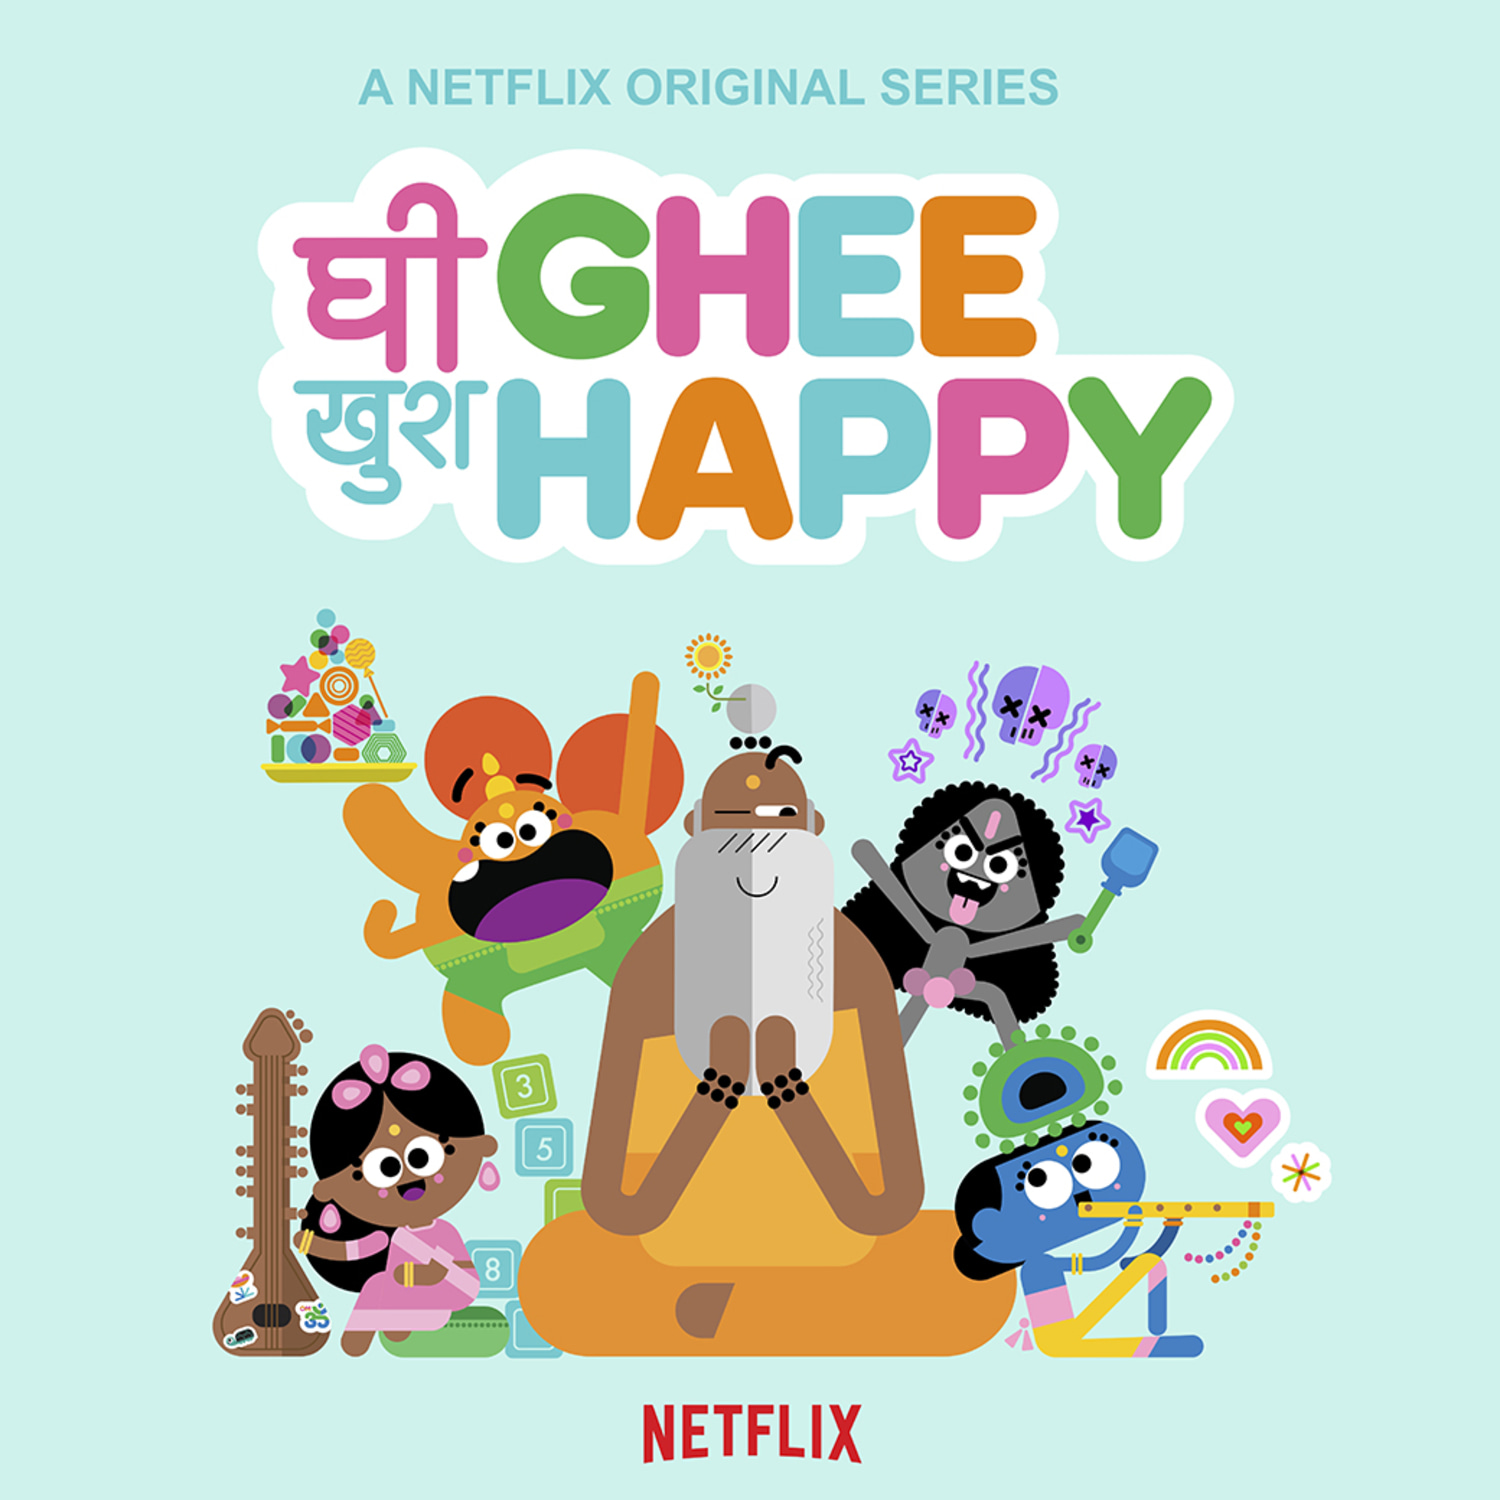 Netflix announces 'Ghee Happy,' a new animated show about Hindu deities